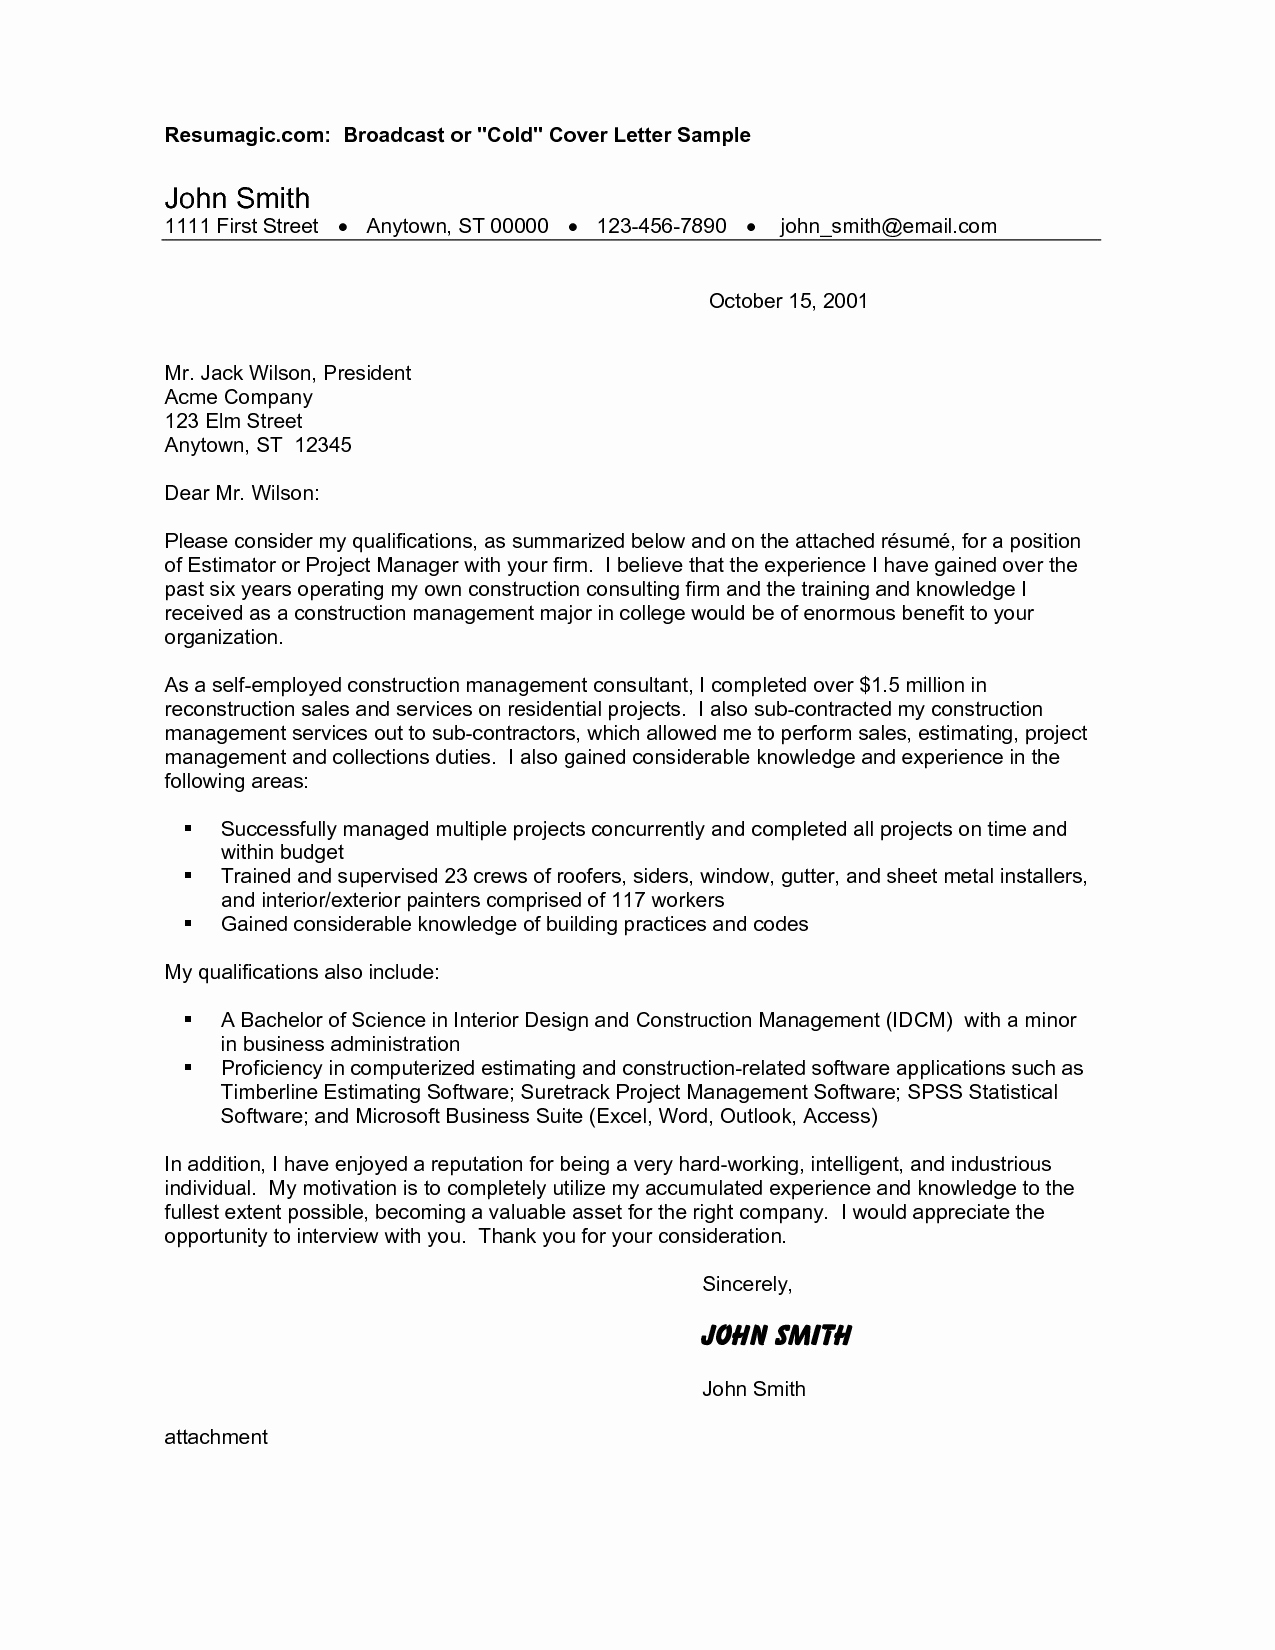 Sales Cover Letter Template Free - Fresh Sales Cover Letter Template